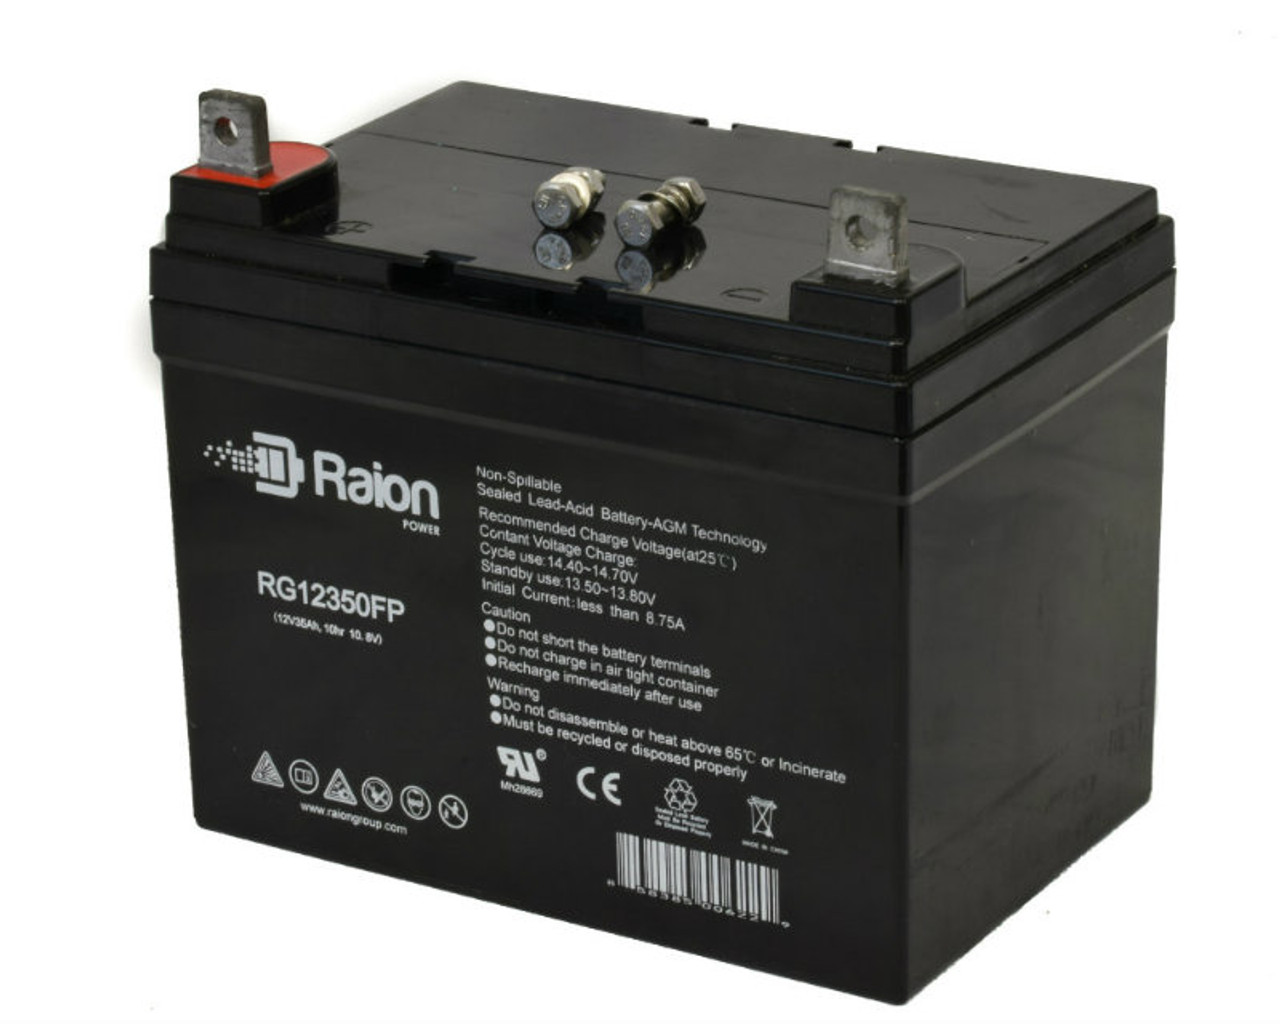 Raion Power Replacement 12V 35Ah Battery for Root MFG Co. 830-E - 1 Pack